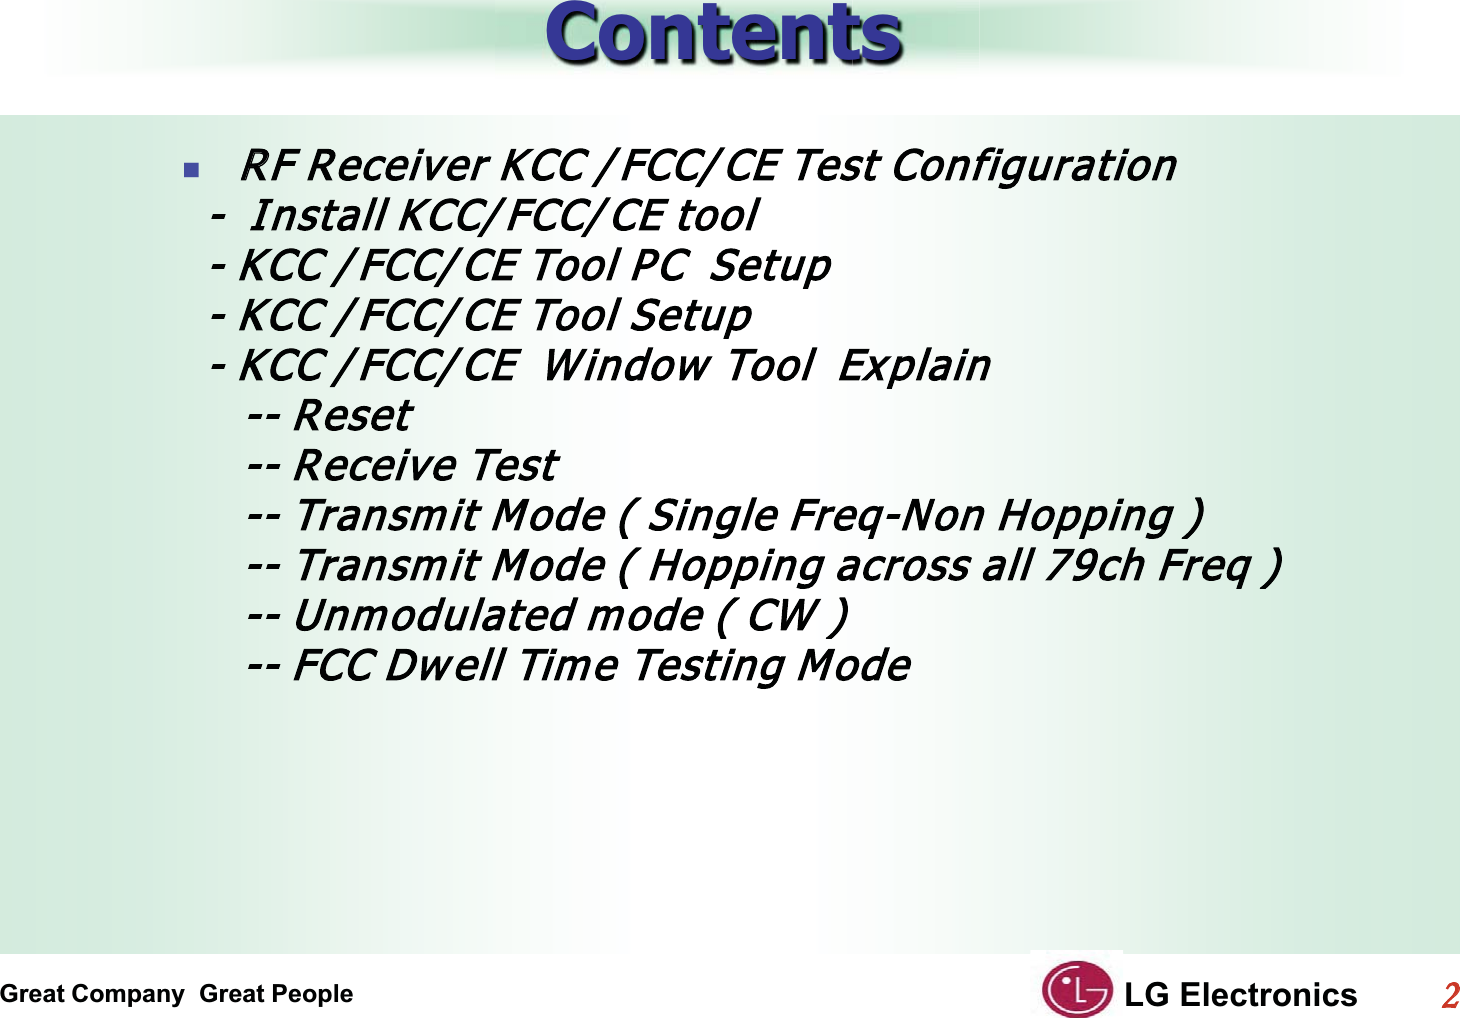 Great Company  Great People LG Electronics22  ContentsRRF Receiver KCC / FCC/ CE Test Configuration  -  Install KCC/ FCC/ CE tool    - KCC / FCC/ CE Tool PC  Setup  - KCC / FCC/ CE Tool Setup  - KCC / FCC/ CE  Window  Tool  Explain     -- Reset     -- Receive Test     -- Transmit Mode ( Single Freq-Non Hopping )     -- Transmit Mode ( Hopping across all 79ch Freq )     -- Unmodulated mode ( CW )     -- FCC Dw ell Time Testing Mode